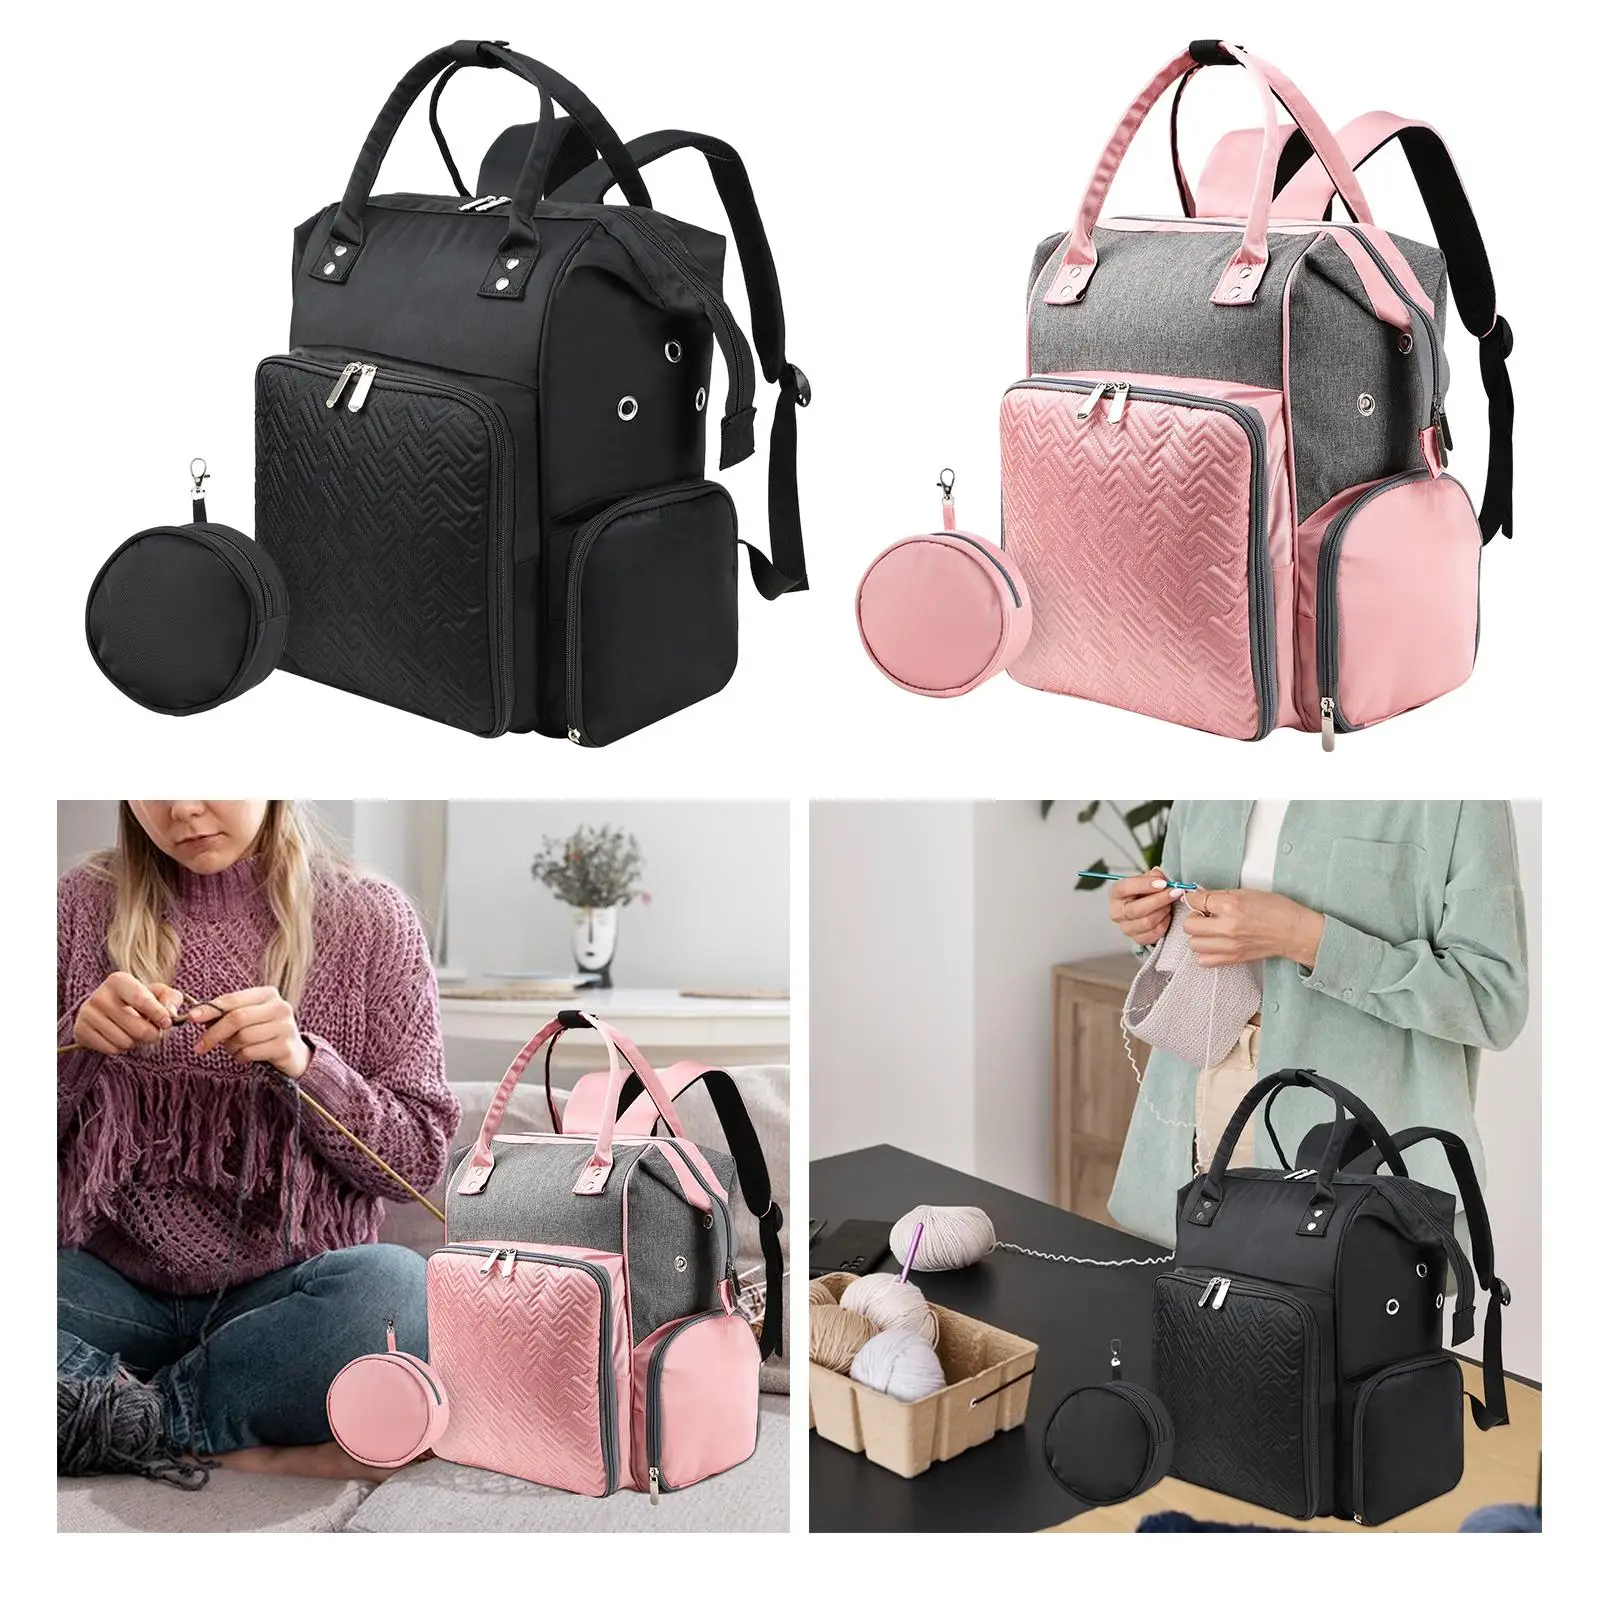 Knitting Bag Backpack Crochet Accessories Portable Water Resistance Knitting Supplies Bag Backpack for Knitting Enthusiasts